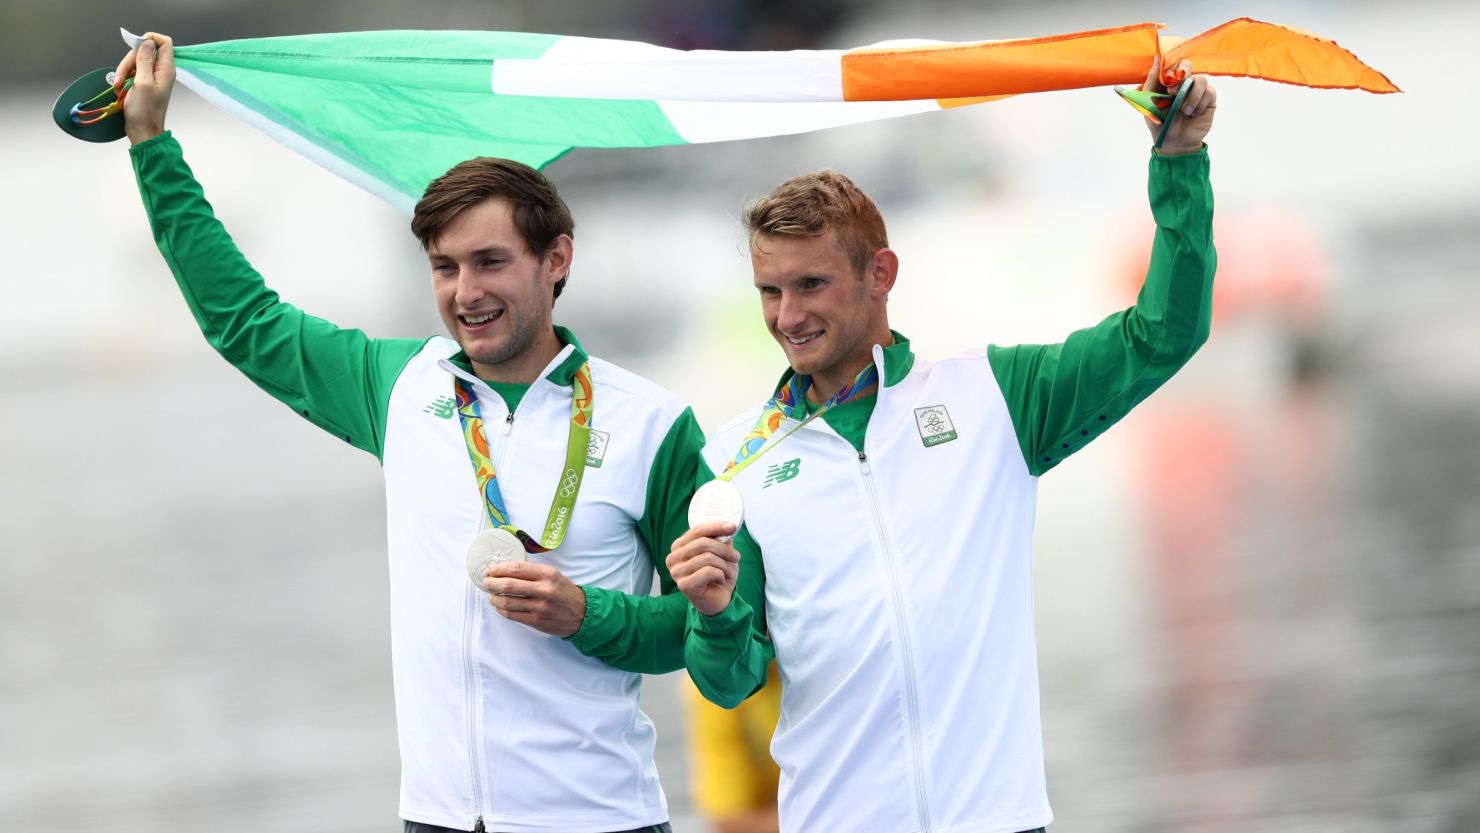 Silver medalists Paul (left) and Gary O'Donovan of Ireland celebrate after getting their medals Friday in Rio.